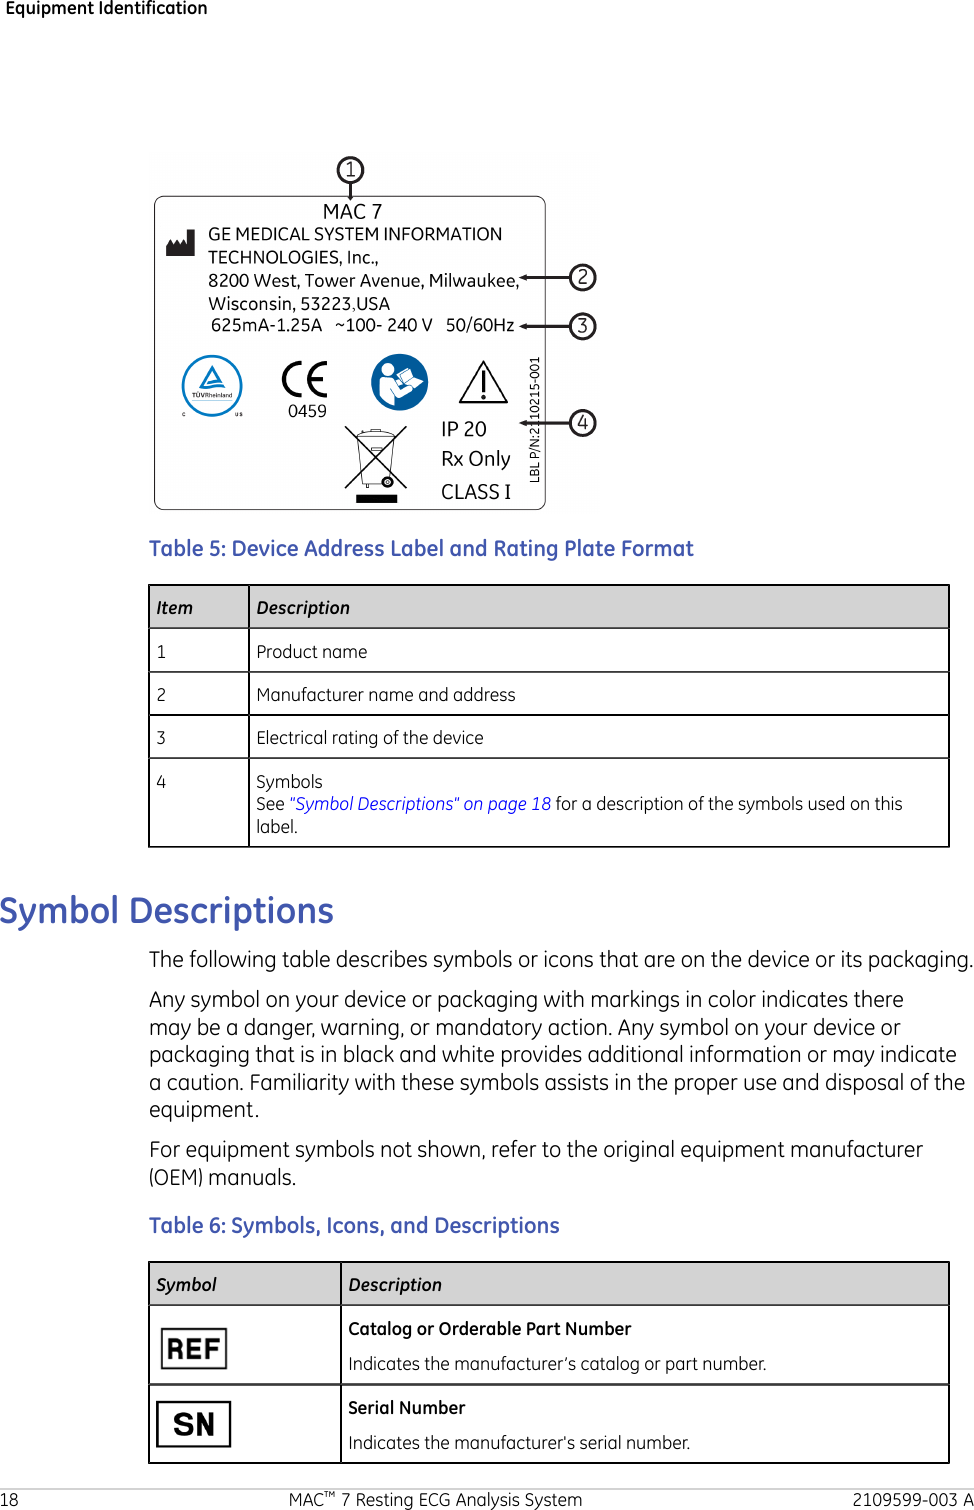 Equipment IdentificationTable 5: Device Address Label and Rating Plate FormatItem Description1 Product name2 Manufacturer name and address3 Electrical rating of the device4 SymbolsSee &quot;Symbol Descriptions&quot; on page 18 for a description of the symbols used on thislabel.Symbol DescriptionsThe following table describes symbols or icons that are on the device or its packaging.Any symbol on your device or packaging with markings in color indicates theremay be a danger, warning, or mandatory action. Any symbol on your device orpackaging that is in black and white provides additional information or may indicatea caution. Familiarity with these symbols assists in the proper use and disposal of theequipment.For equipment symbols not shown, refer to the original equipment manufacturer(OEM) manuals.Table 6: Symbols, Icons, and DescriptionsSymbol DescriptionCatalog or Orderable Part NumberIndicates the manufacturer’s catalog or part number.Serial NumberIndicates the manufacturer&apos;s serial number.18 MAC™ 7 Resting ECG Analysis System 2109599-003 A